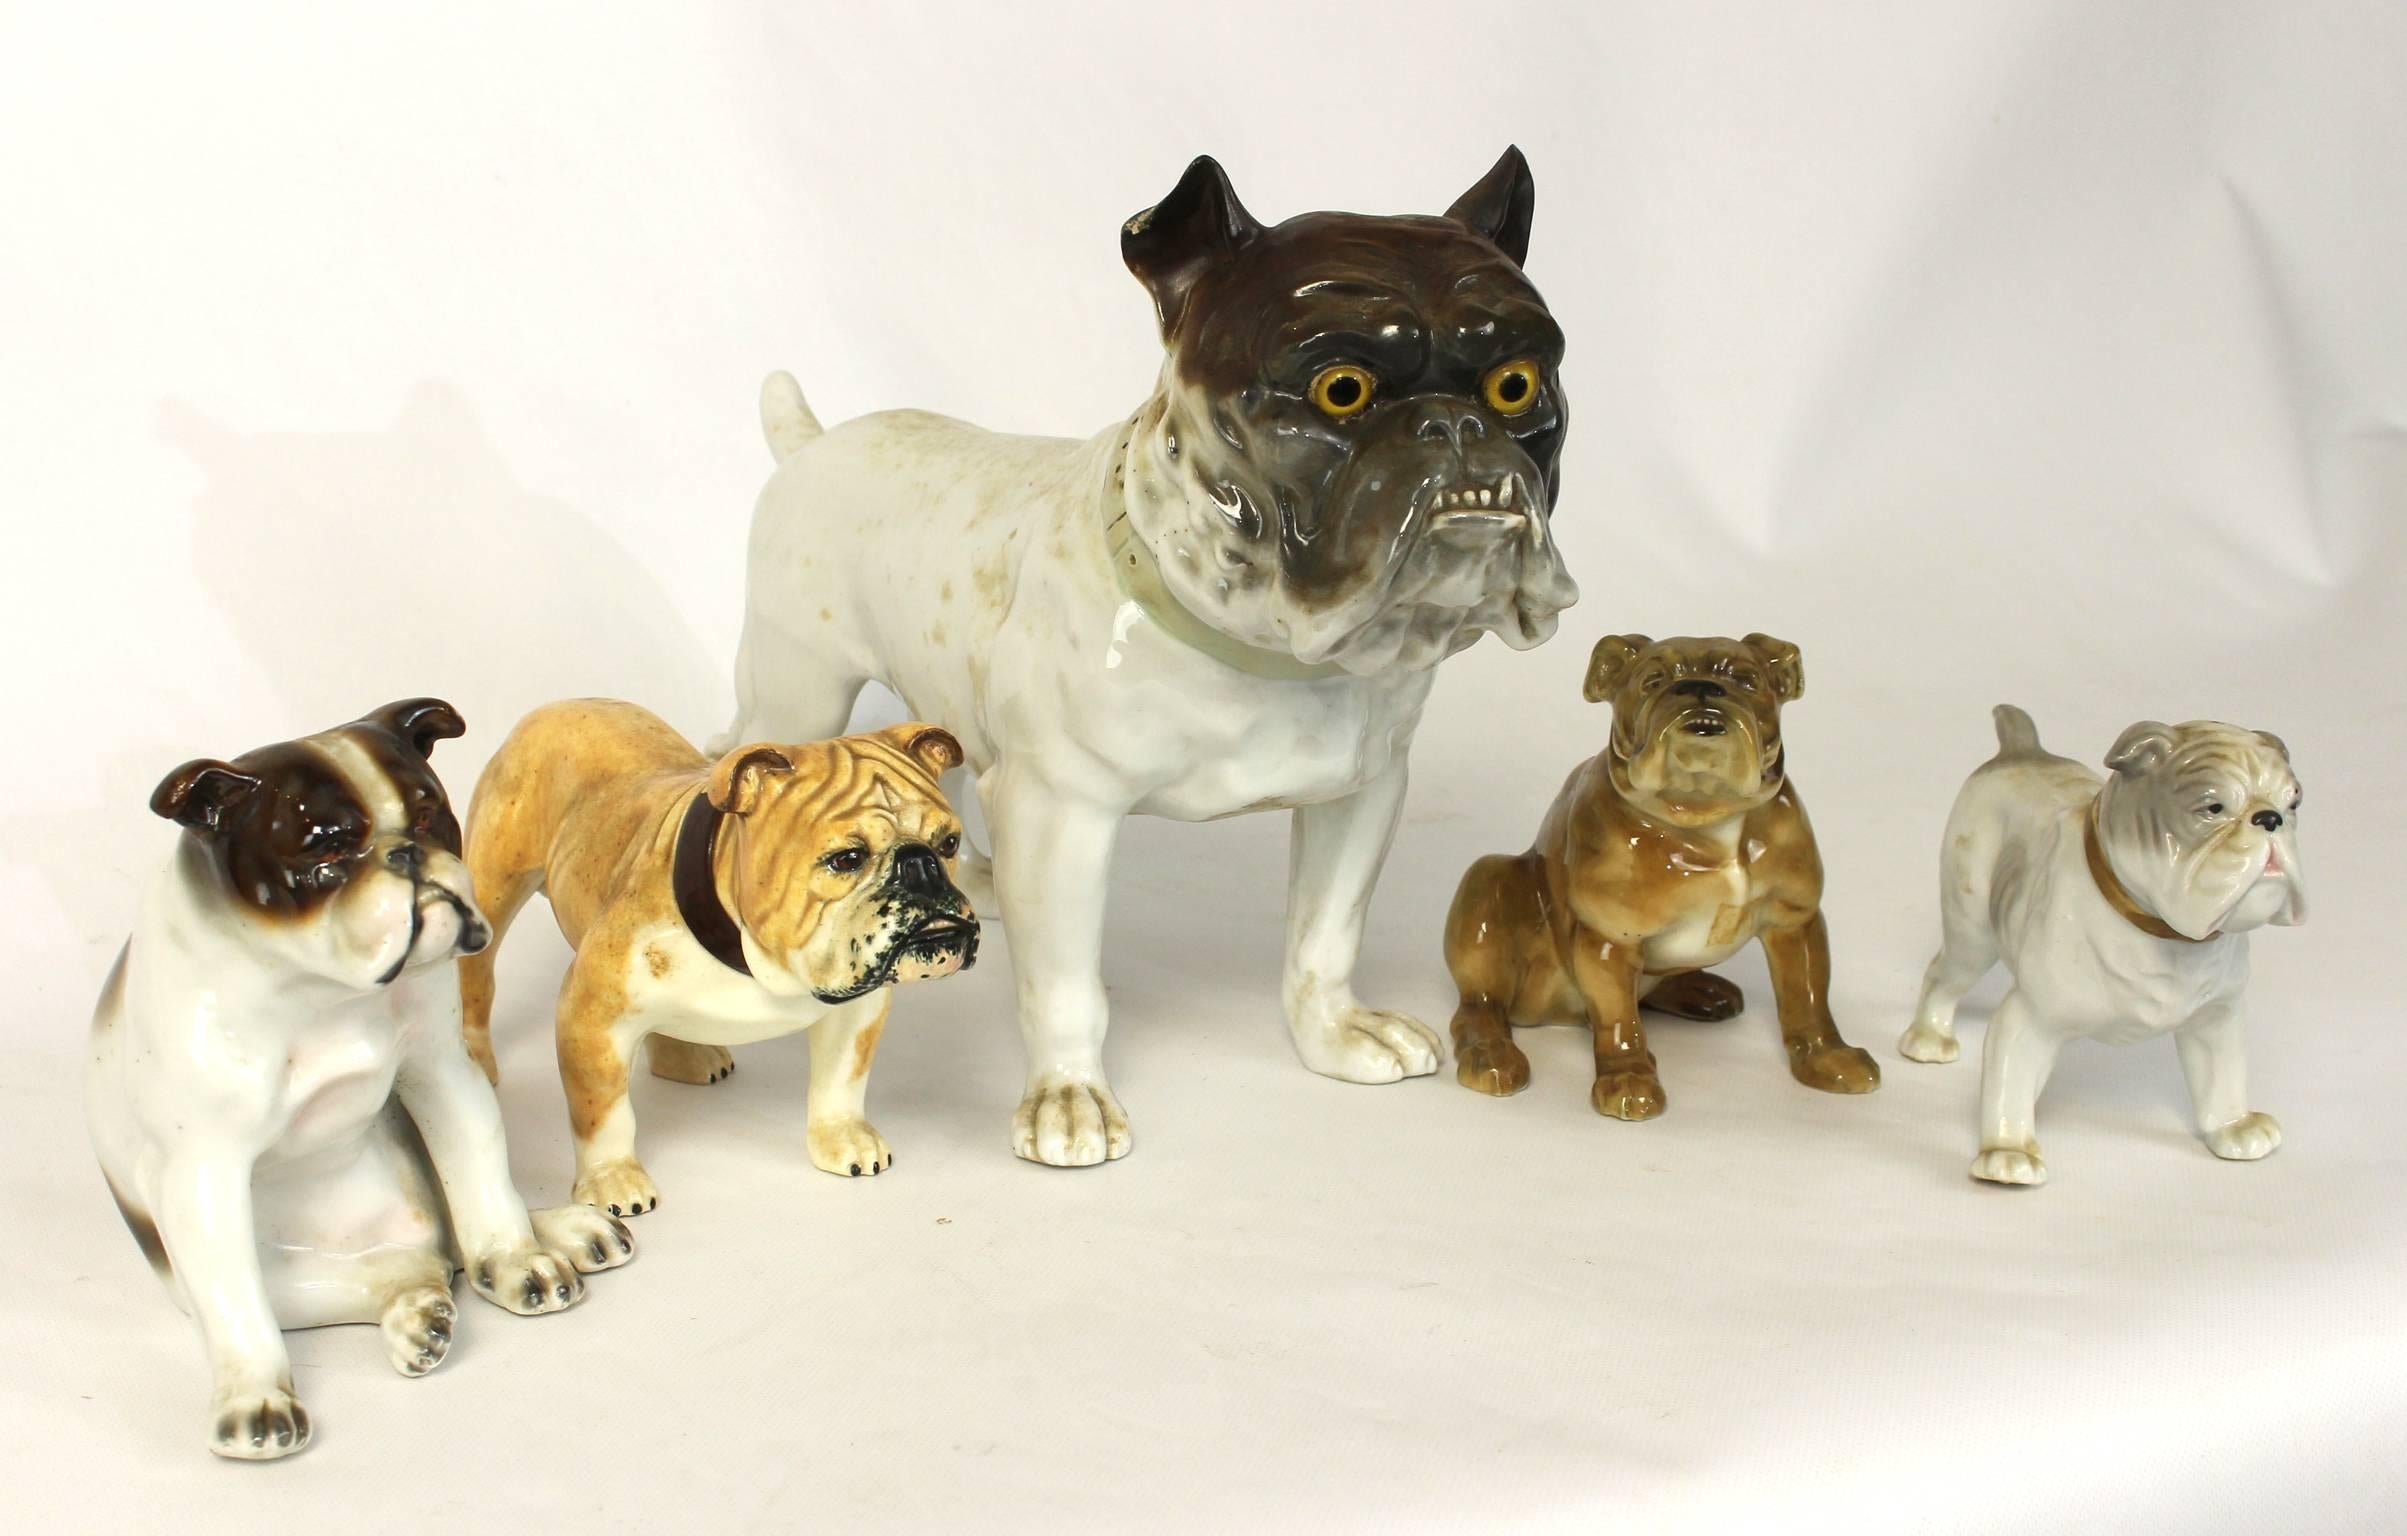 A exceptionally charming collection of five hand-painted porcelain bulldogs in various poses. The assembled collection date from the late 19th through the mid-20th century and were made in various countries throughout Europe and Asia.